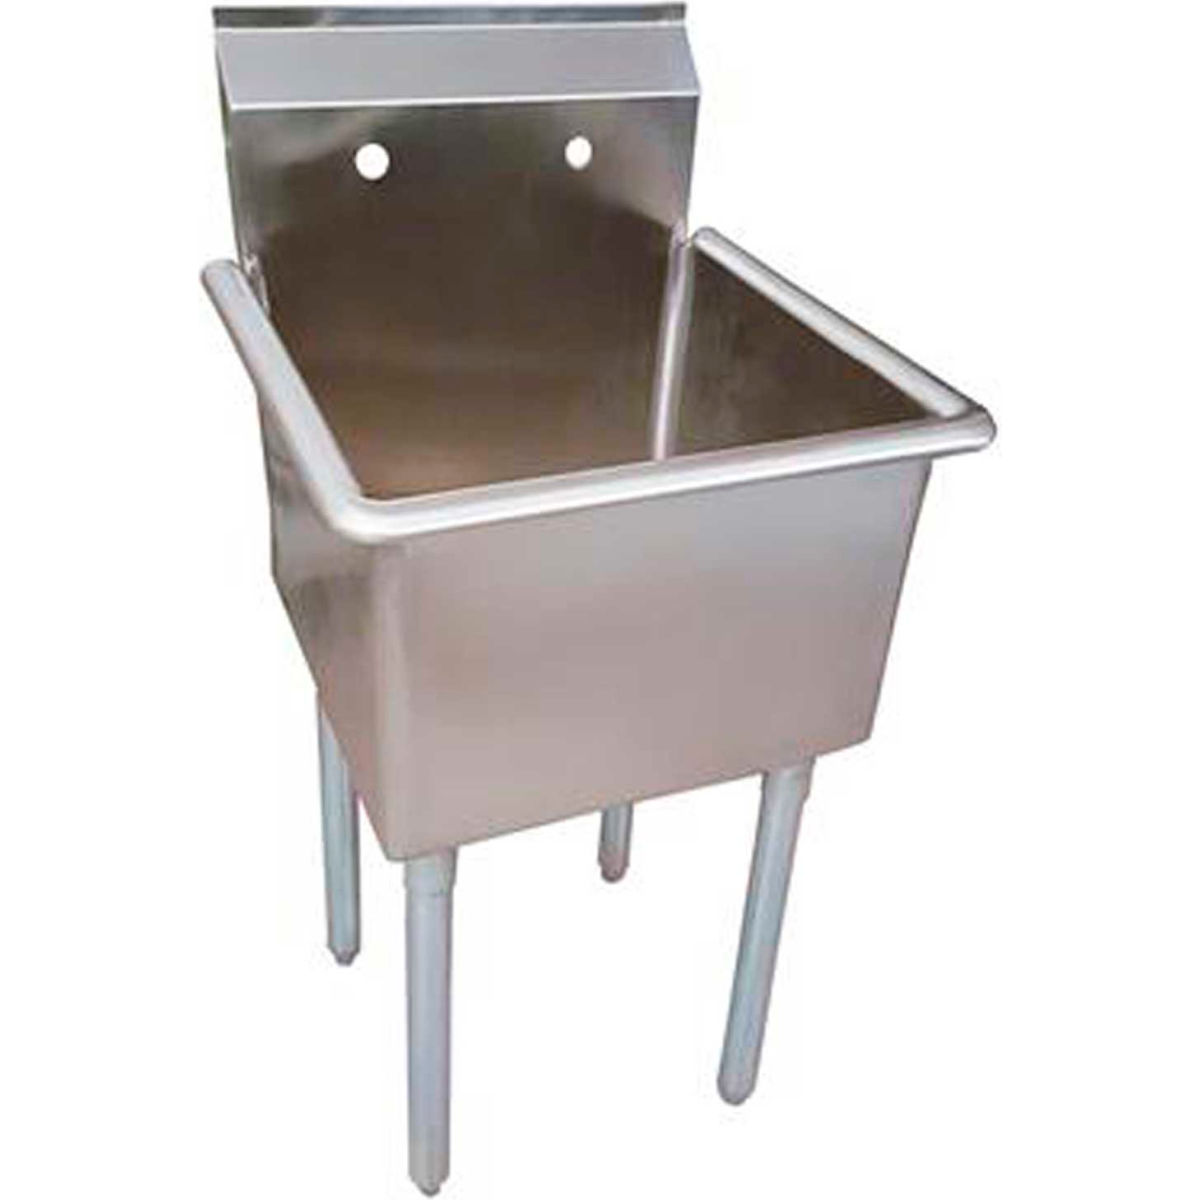 Picture of BK Resources B2314129 1 Compartment Stainless Steel Utility Sink - 24 x 24 x 14 in.